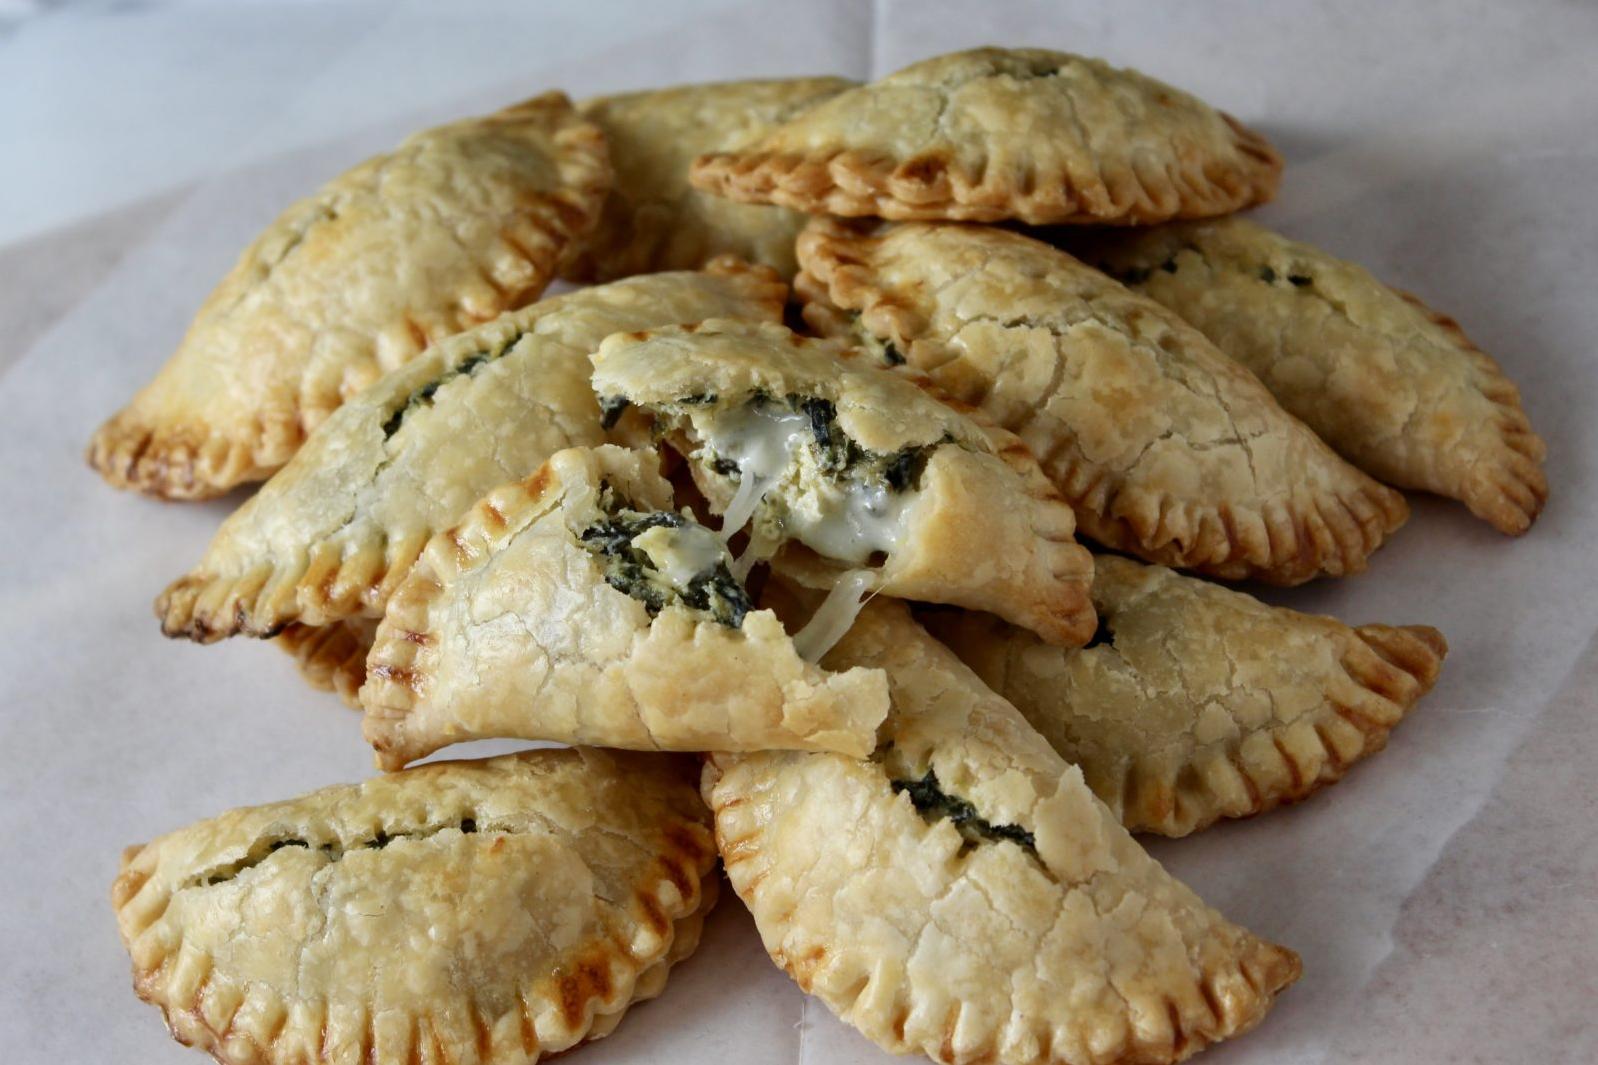  Say hello to my little friends: spinach and hot dogs in empanada form.